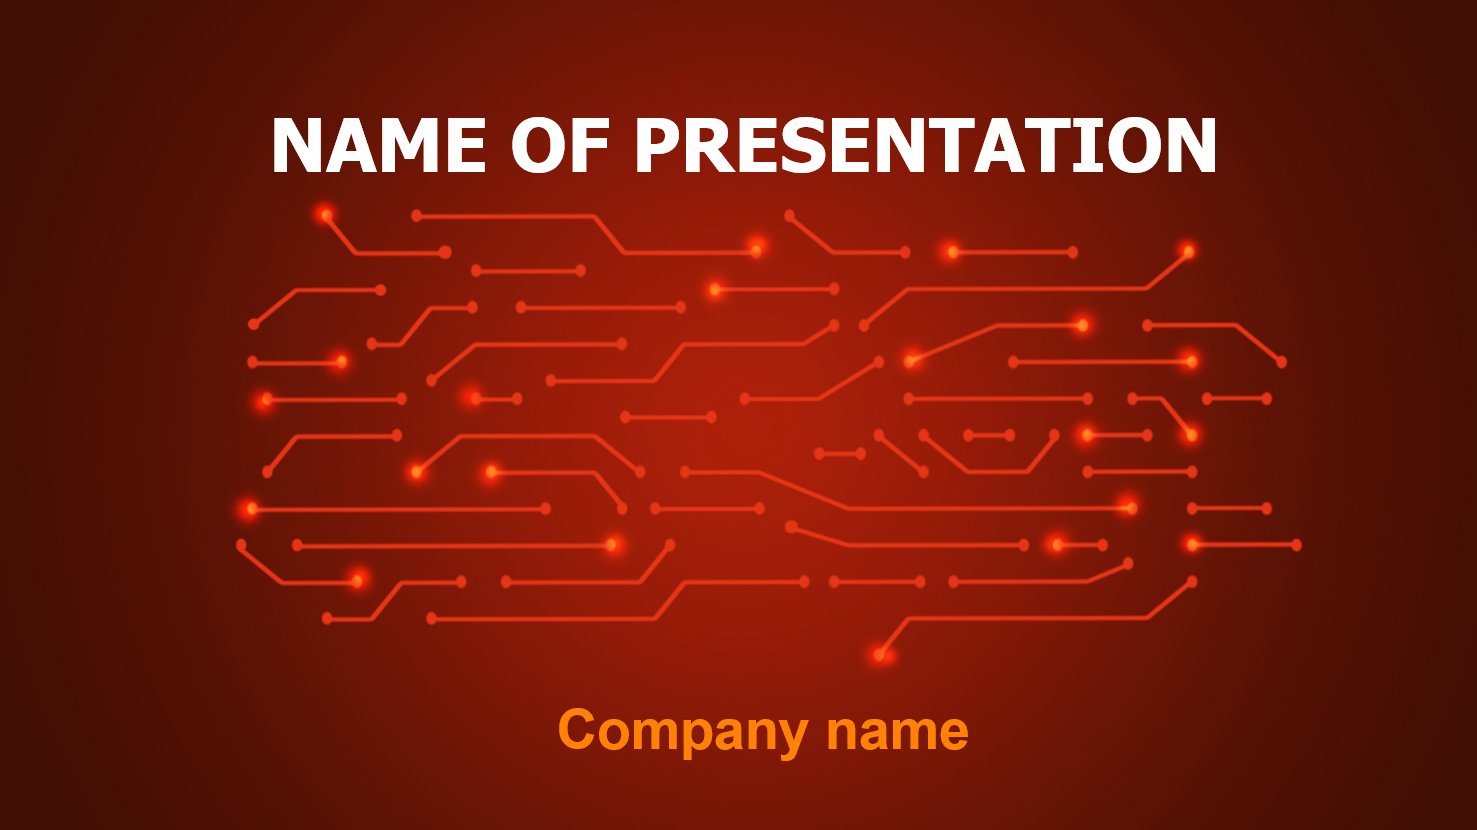 download-free-informatics-powerpoint-theme-for-presentation-my